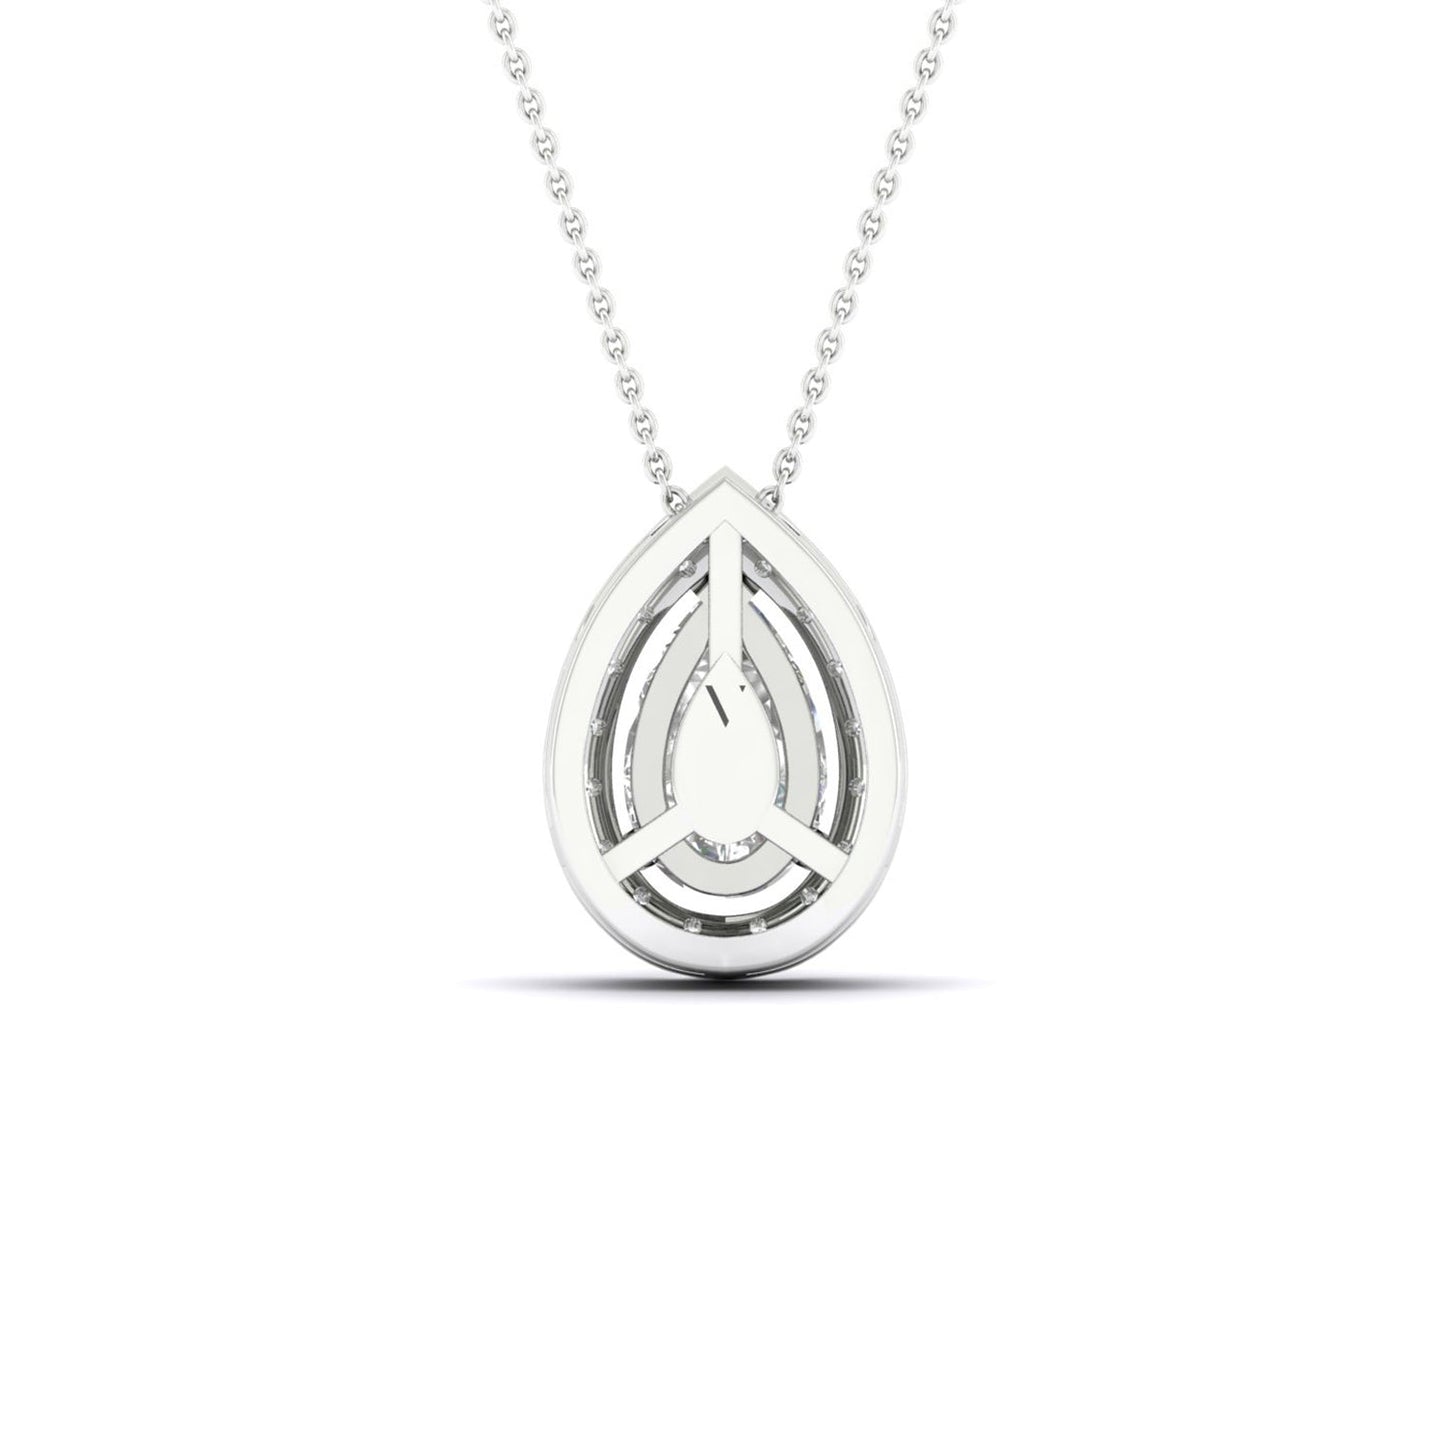 Dewdrop Halo Necklace_Product Angle_1/3Ct. - 4